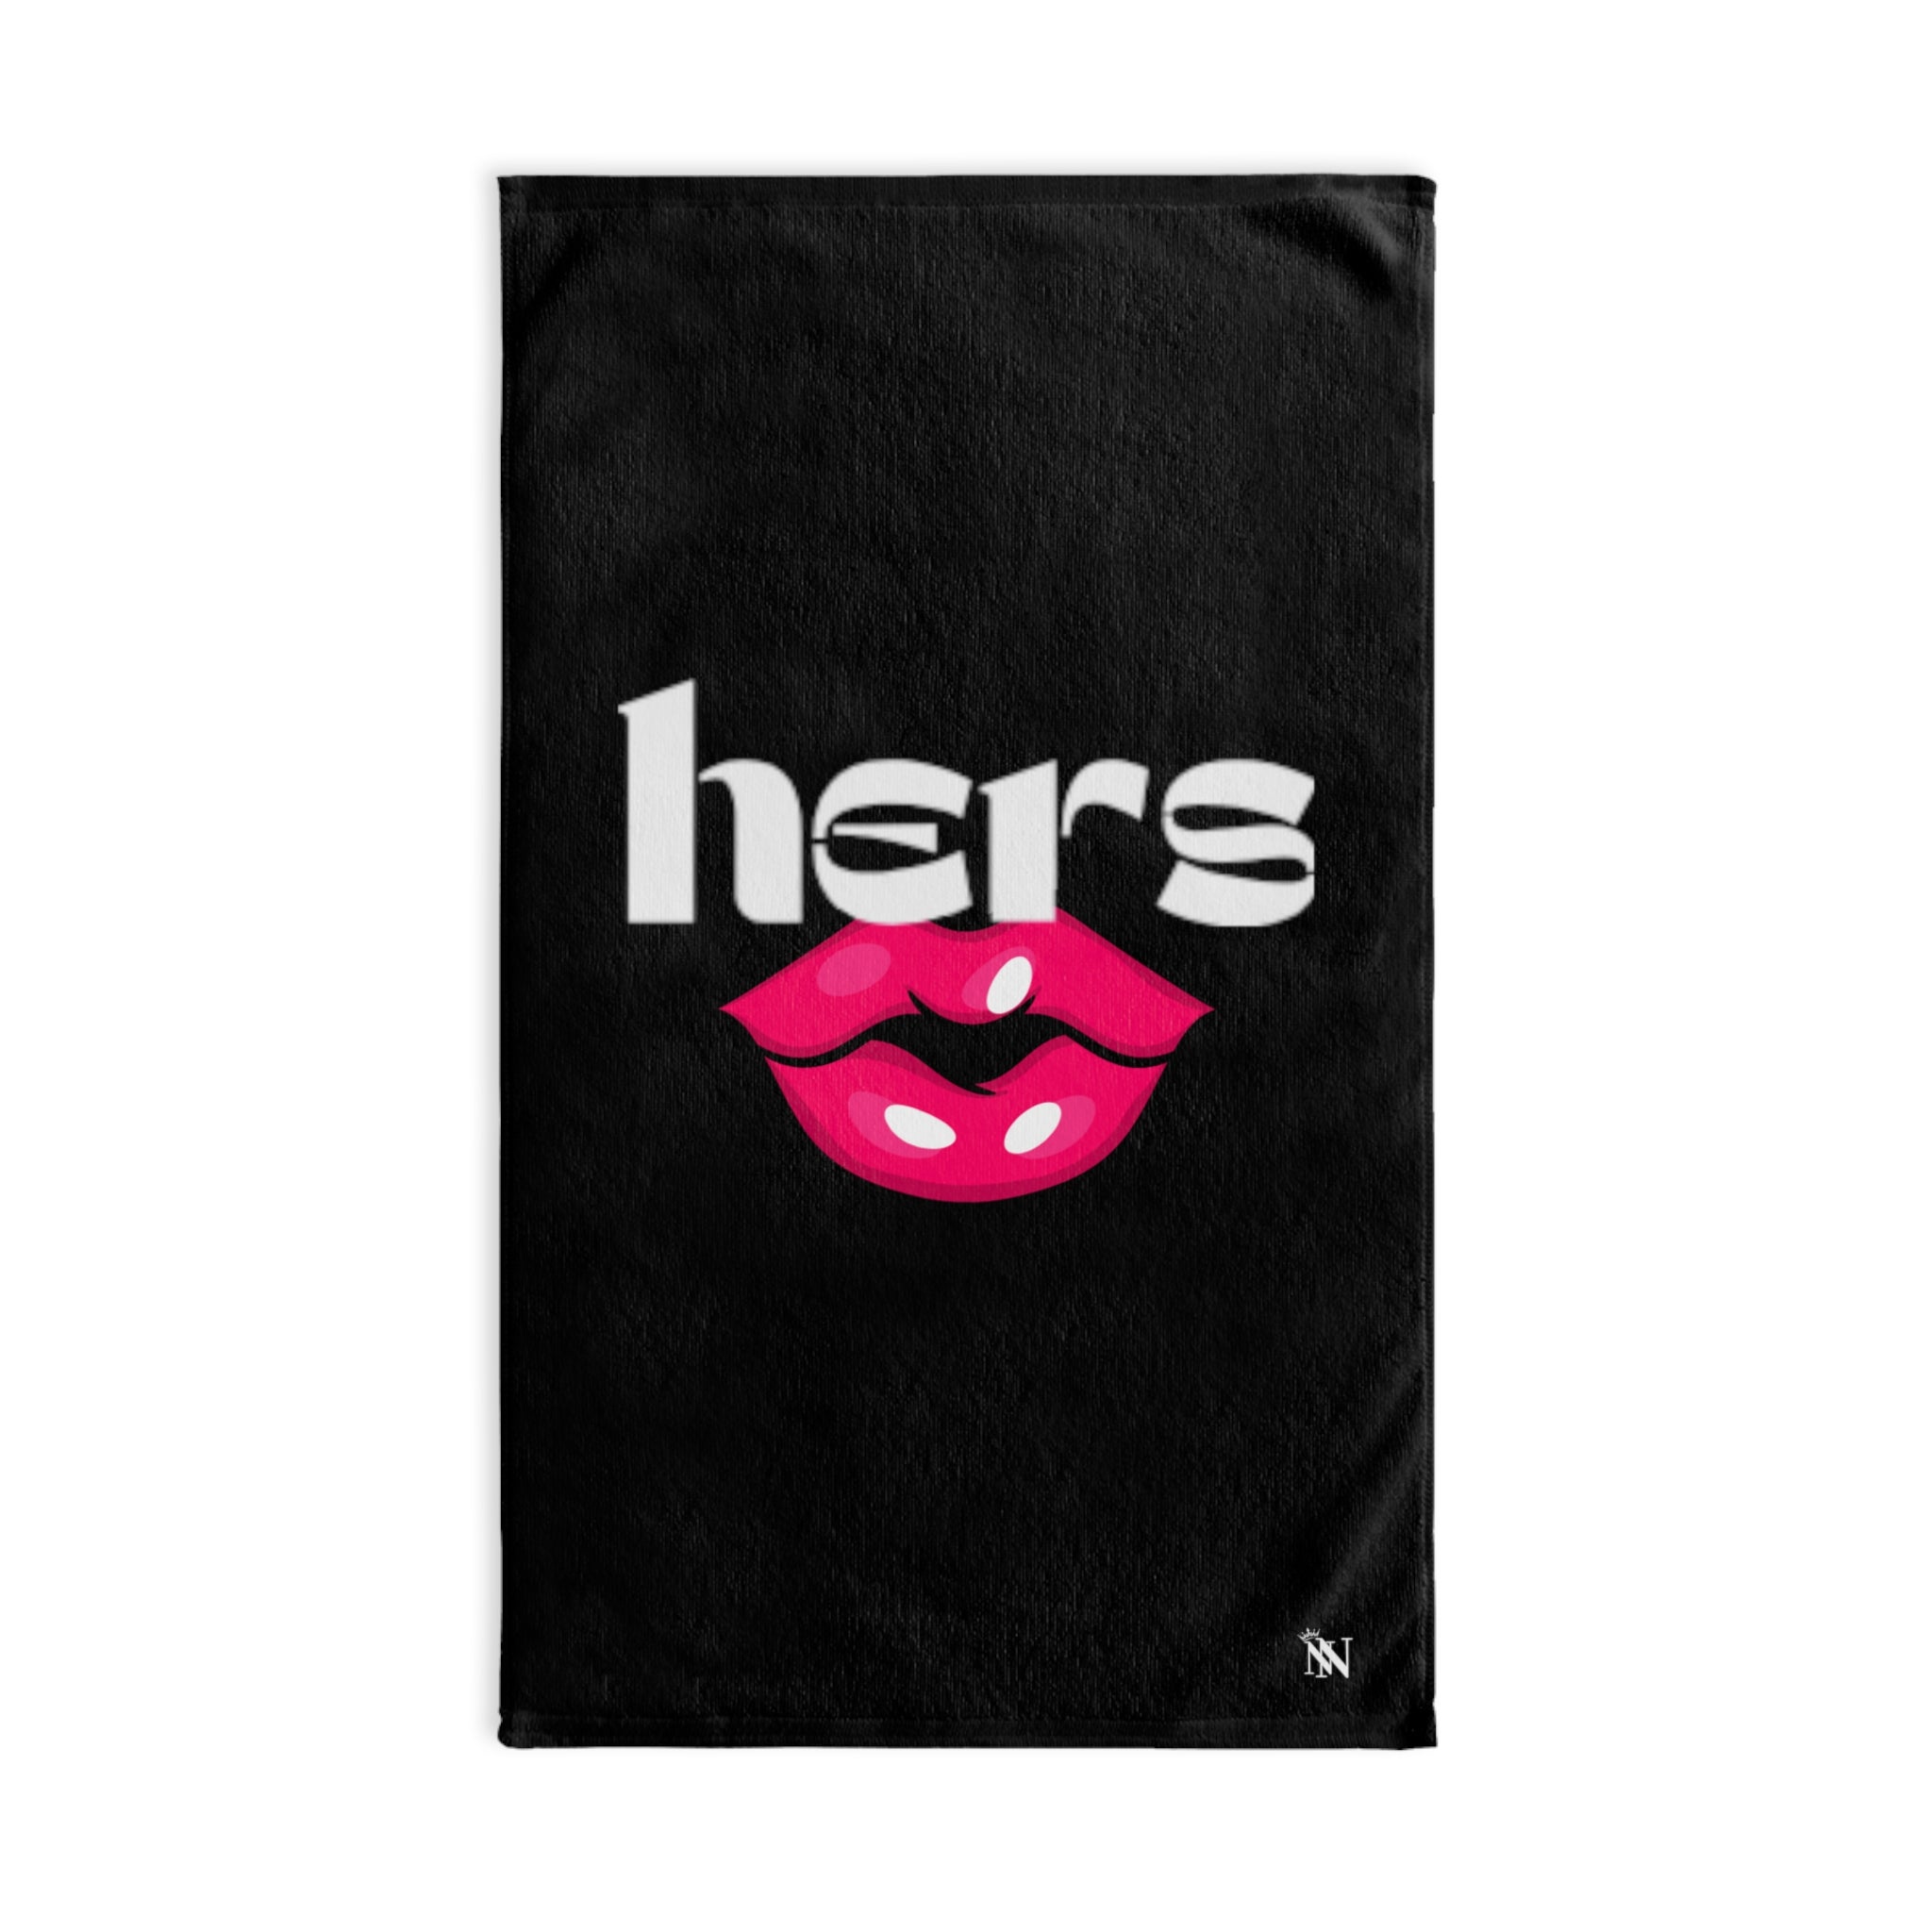 Shiny Kiss Giant Black | Sexy Gifts for Boyfriend, Funny Towel Romantic Gift for Wedding Couple Fiance First Year 2nd Anniversary Valentines, Party Gag Gifts, Joke Humor Cloth for Husband Men BF NECTAR NAPKINS